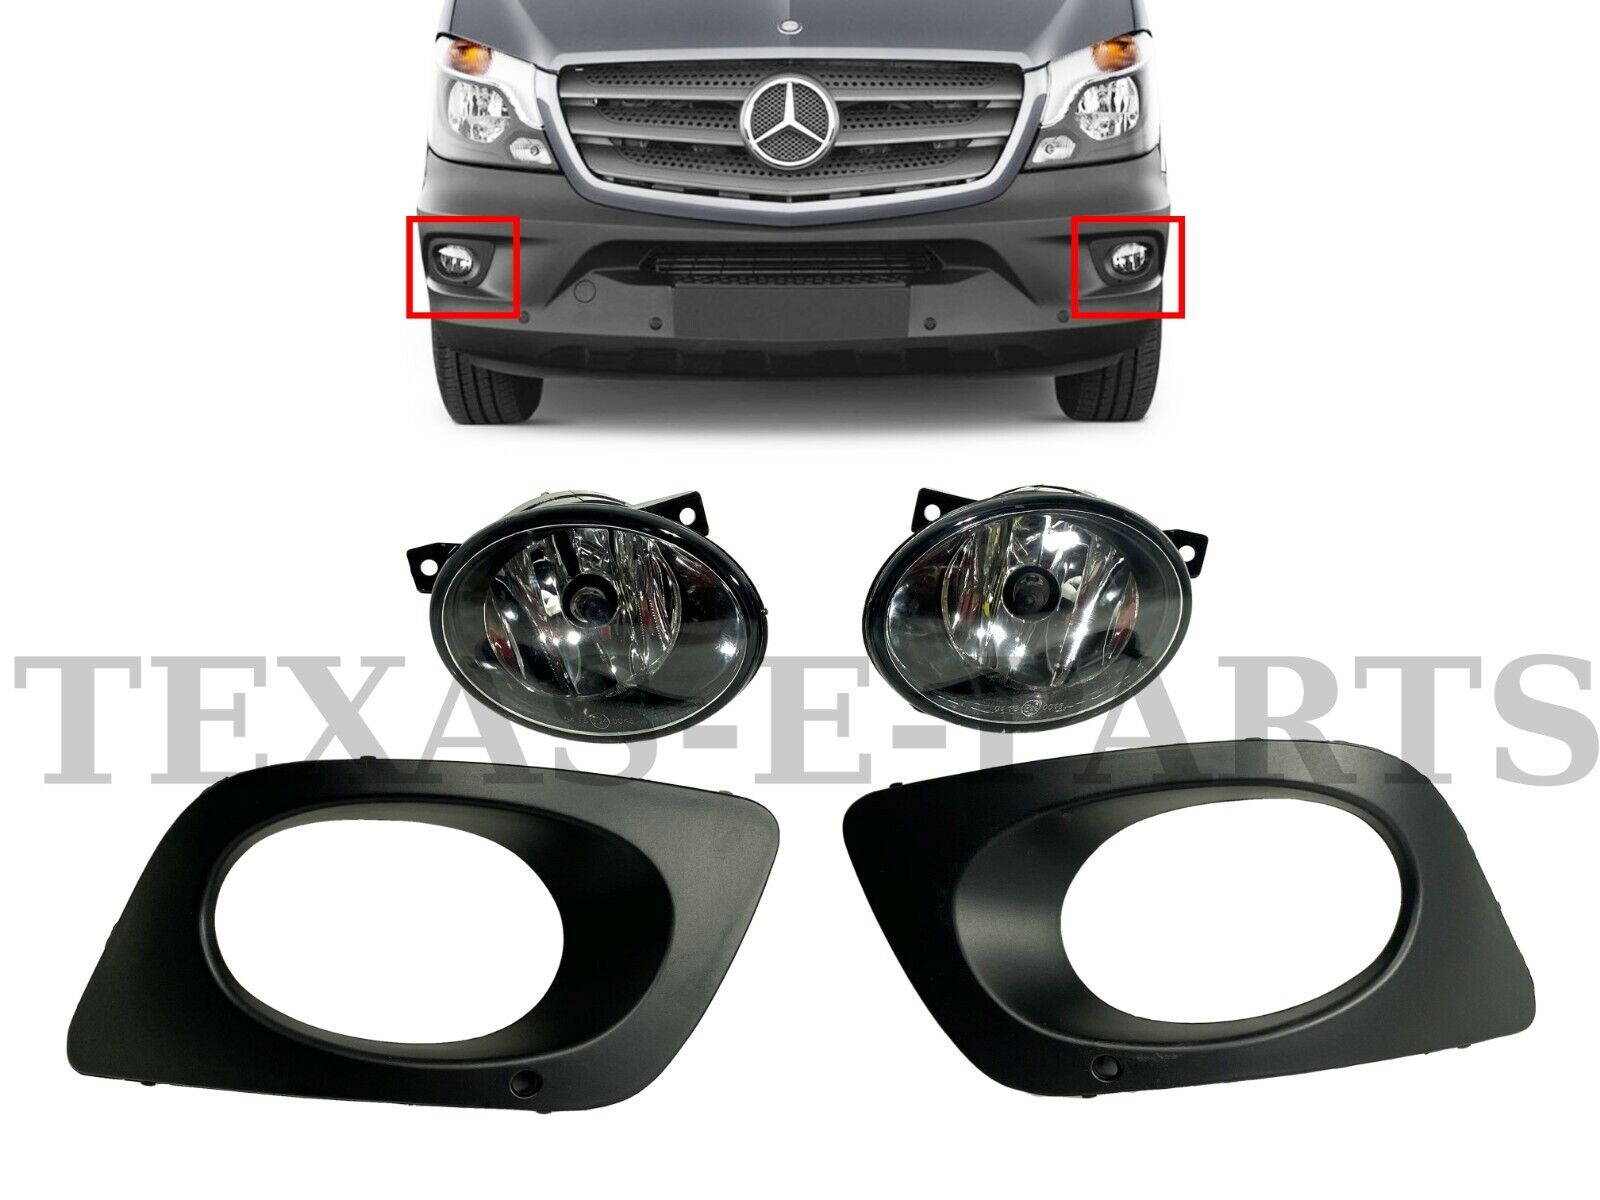 New Fits 2014-2018 Sprinter 2500 3500 Left Right Front Fog Light With Cover Set